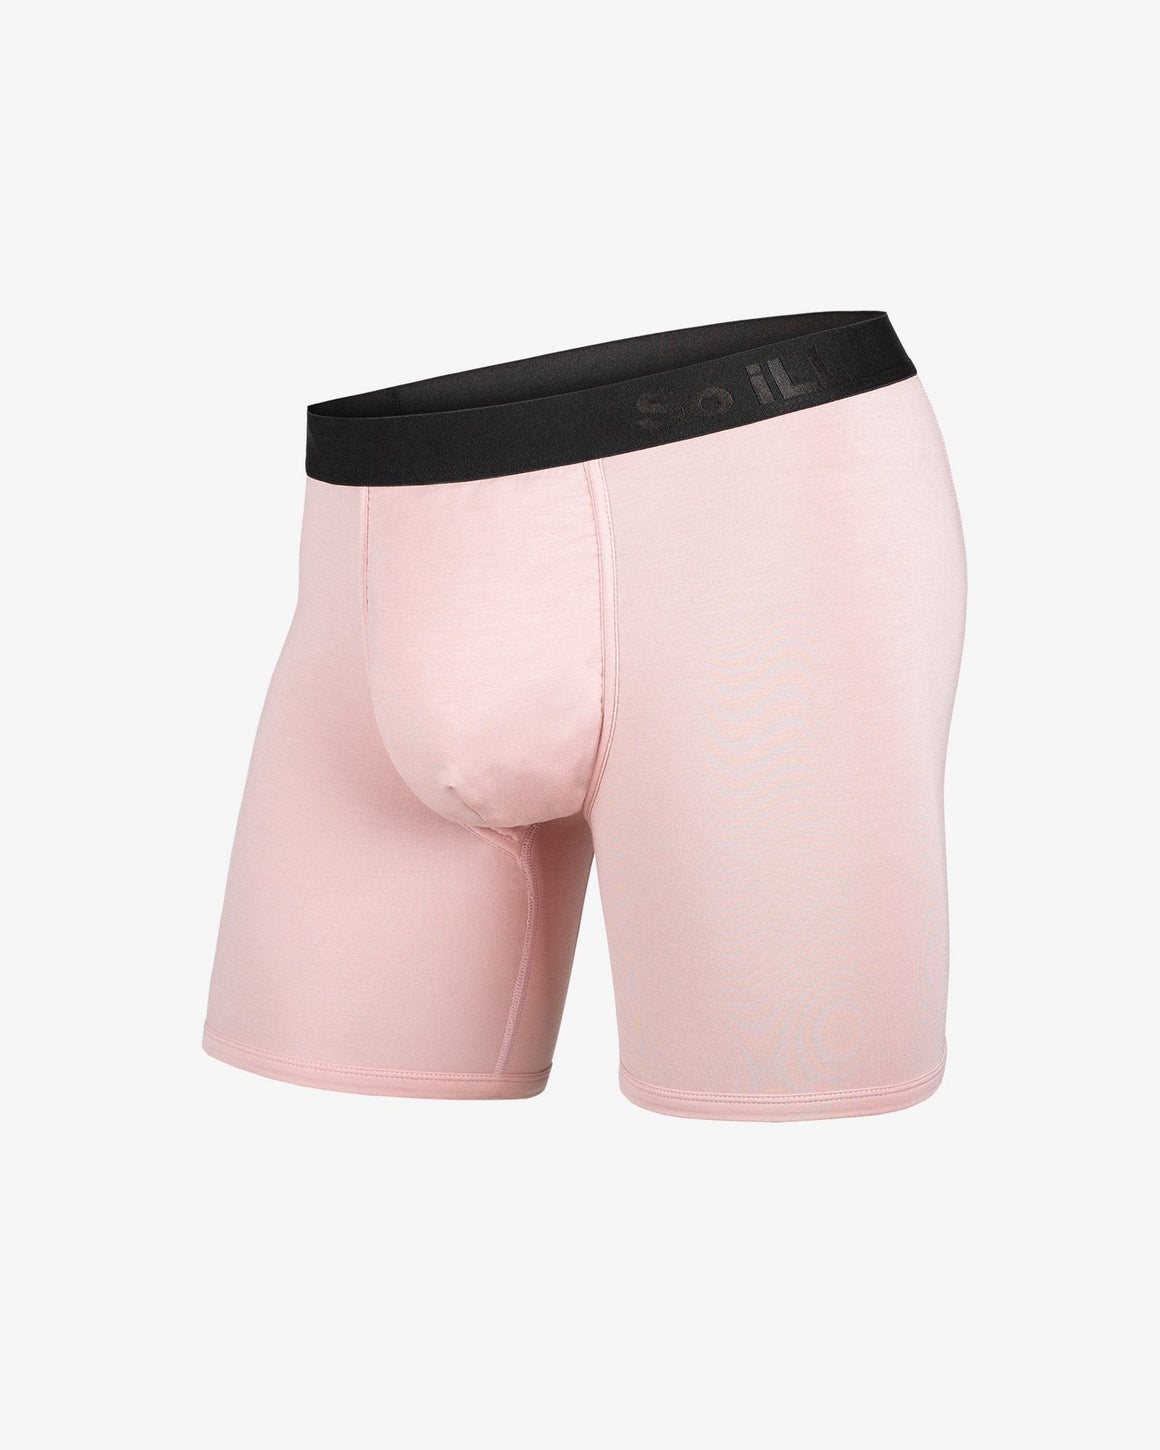 Nakoa Boxer Briefs • Dirty Pink - Dirty Pink - S - So iLL - BN3TH